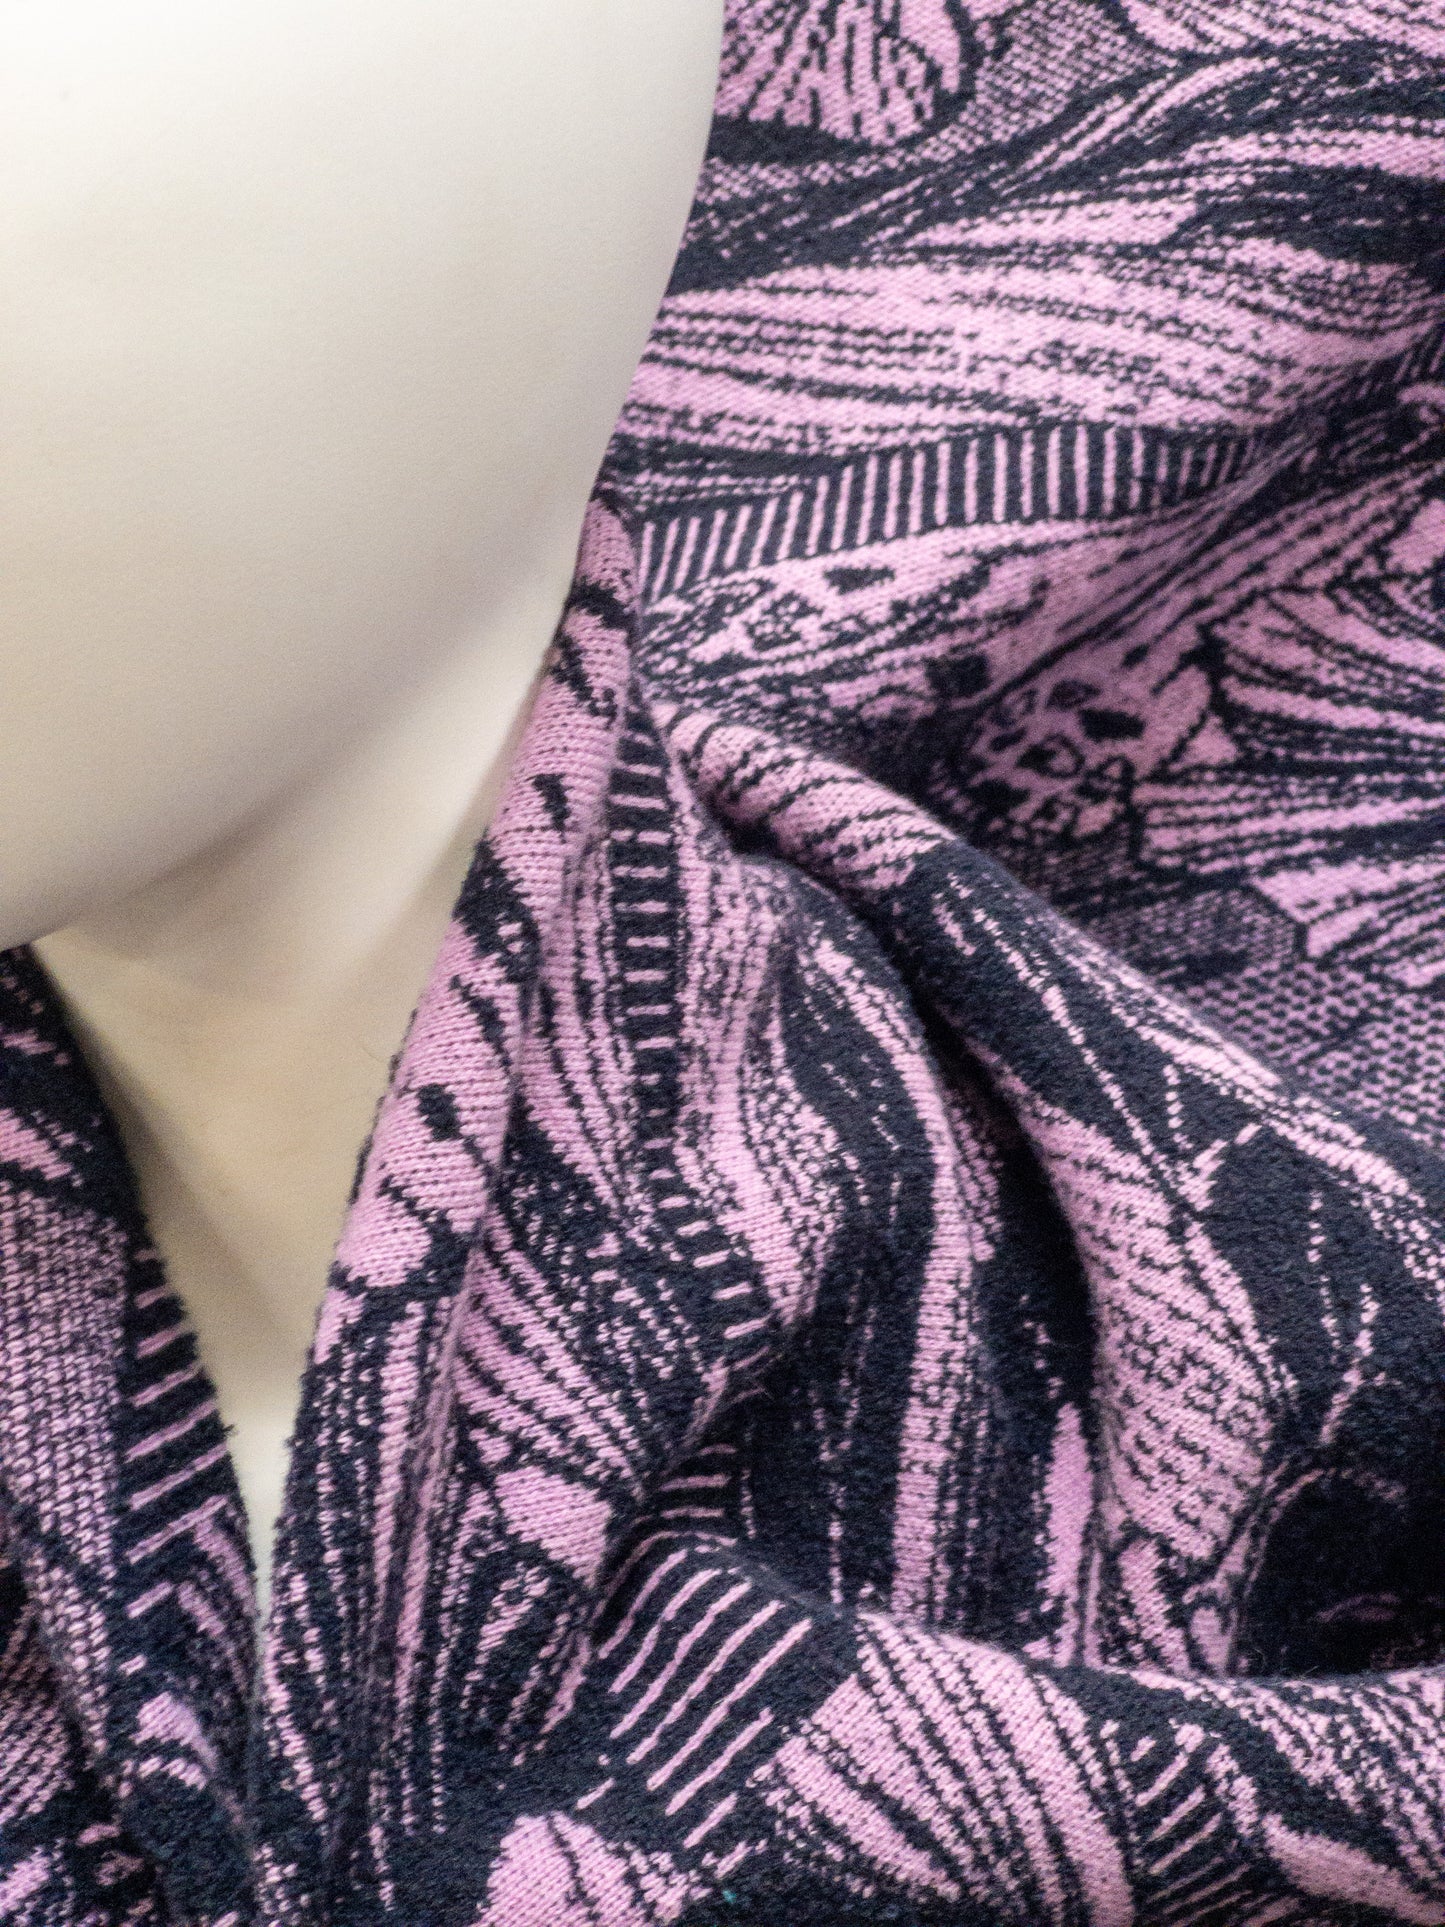 Exclusive Jaquard Knit in lilac/marine botanical garden